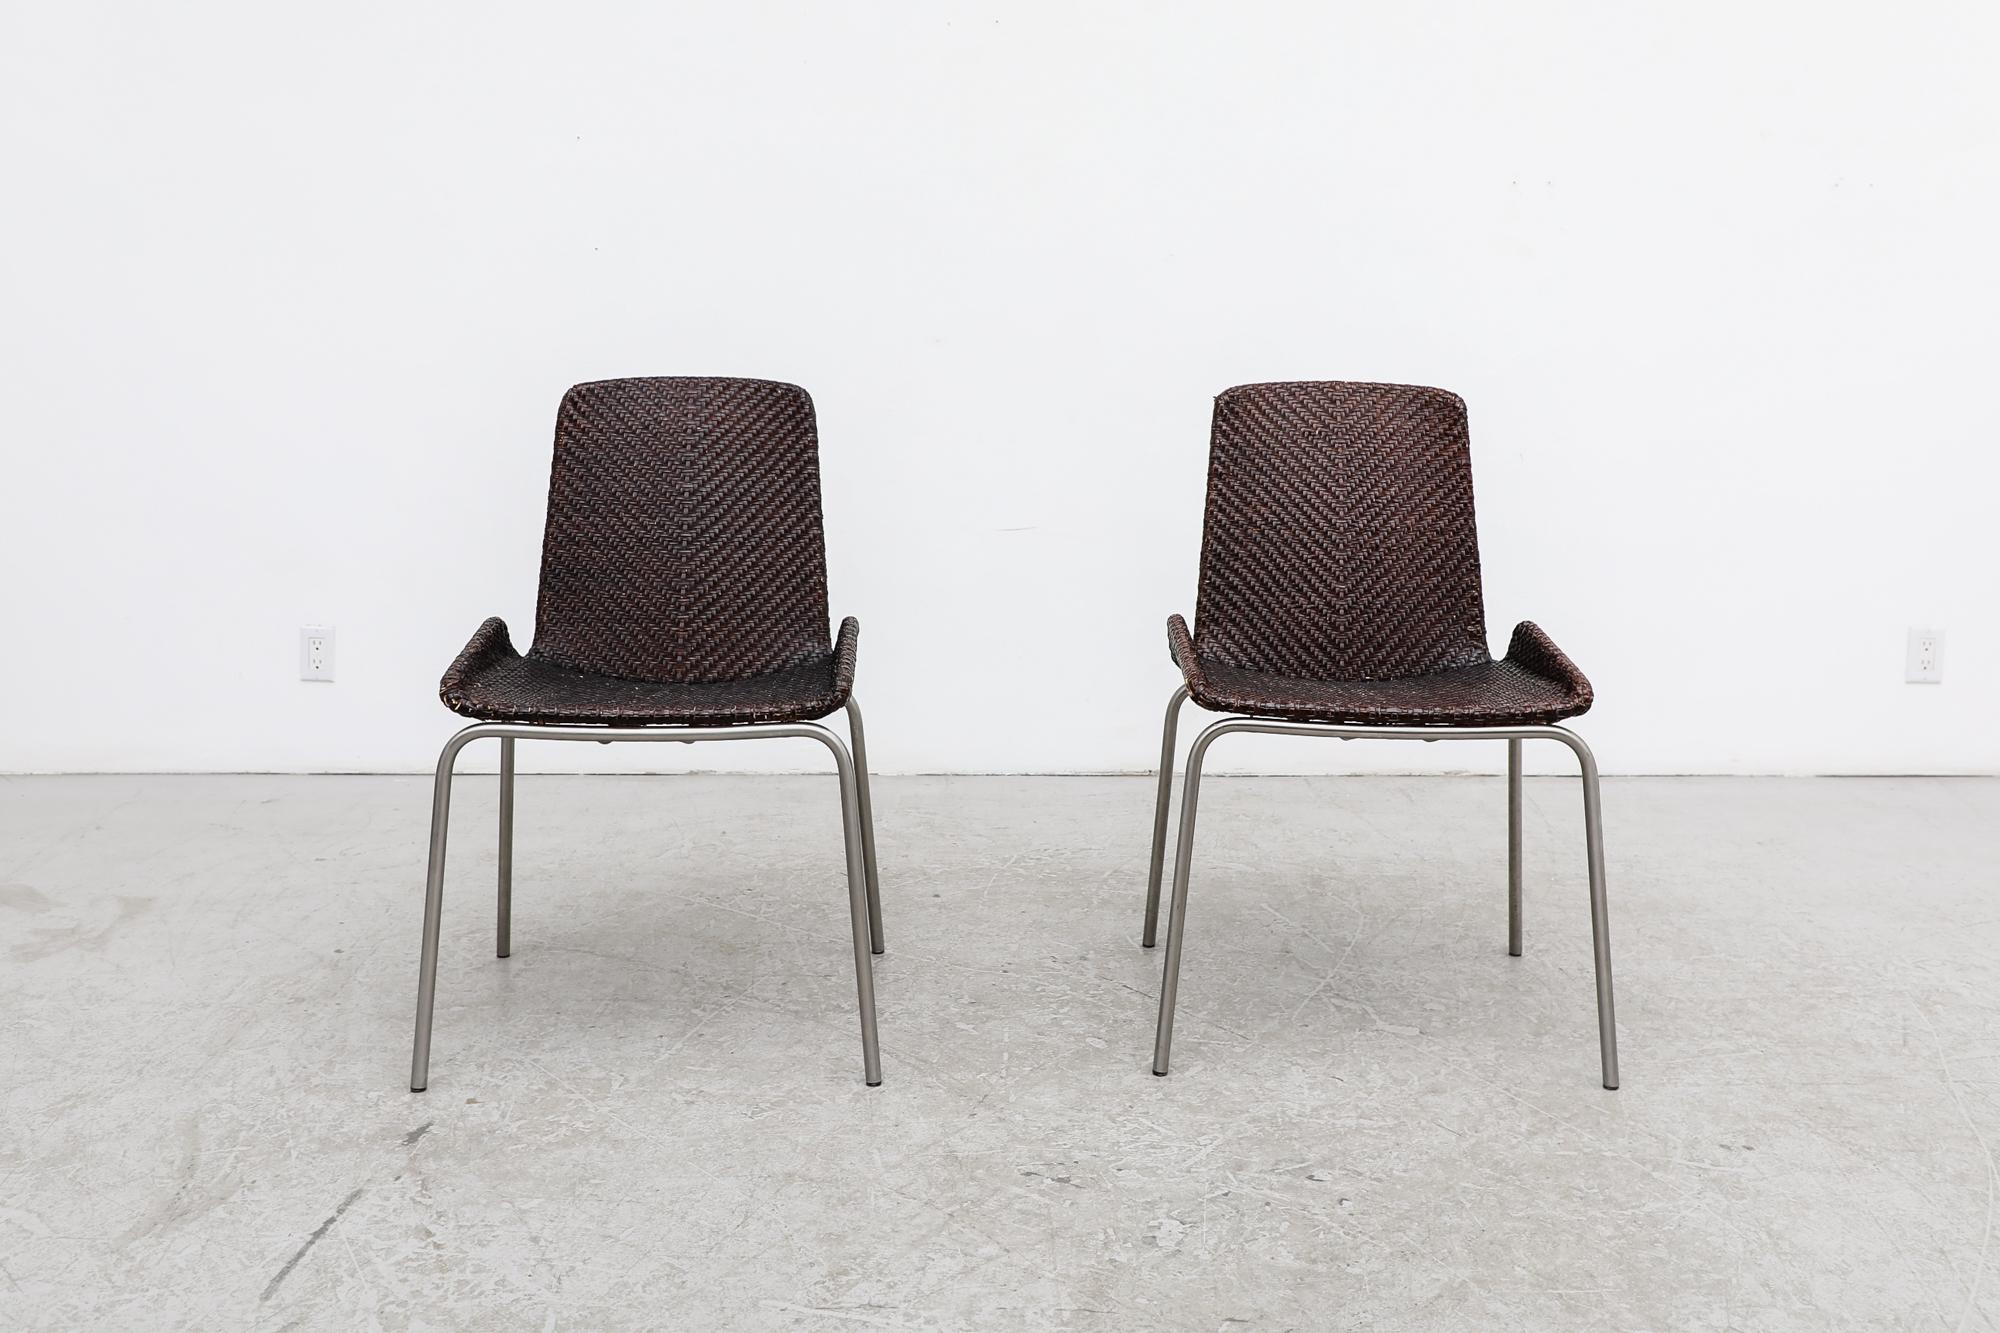 Pair of vintage, mid century, hand woven leather side chairs with chrome legs. In original condition with visible wear consistent with their age and use. Set price. Shown with a set of 4 matching armchairs available, listed separately